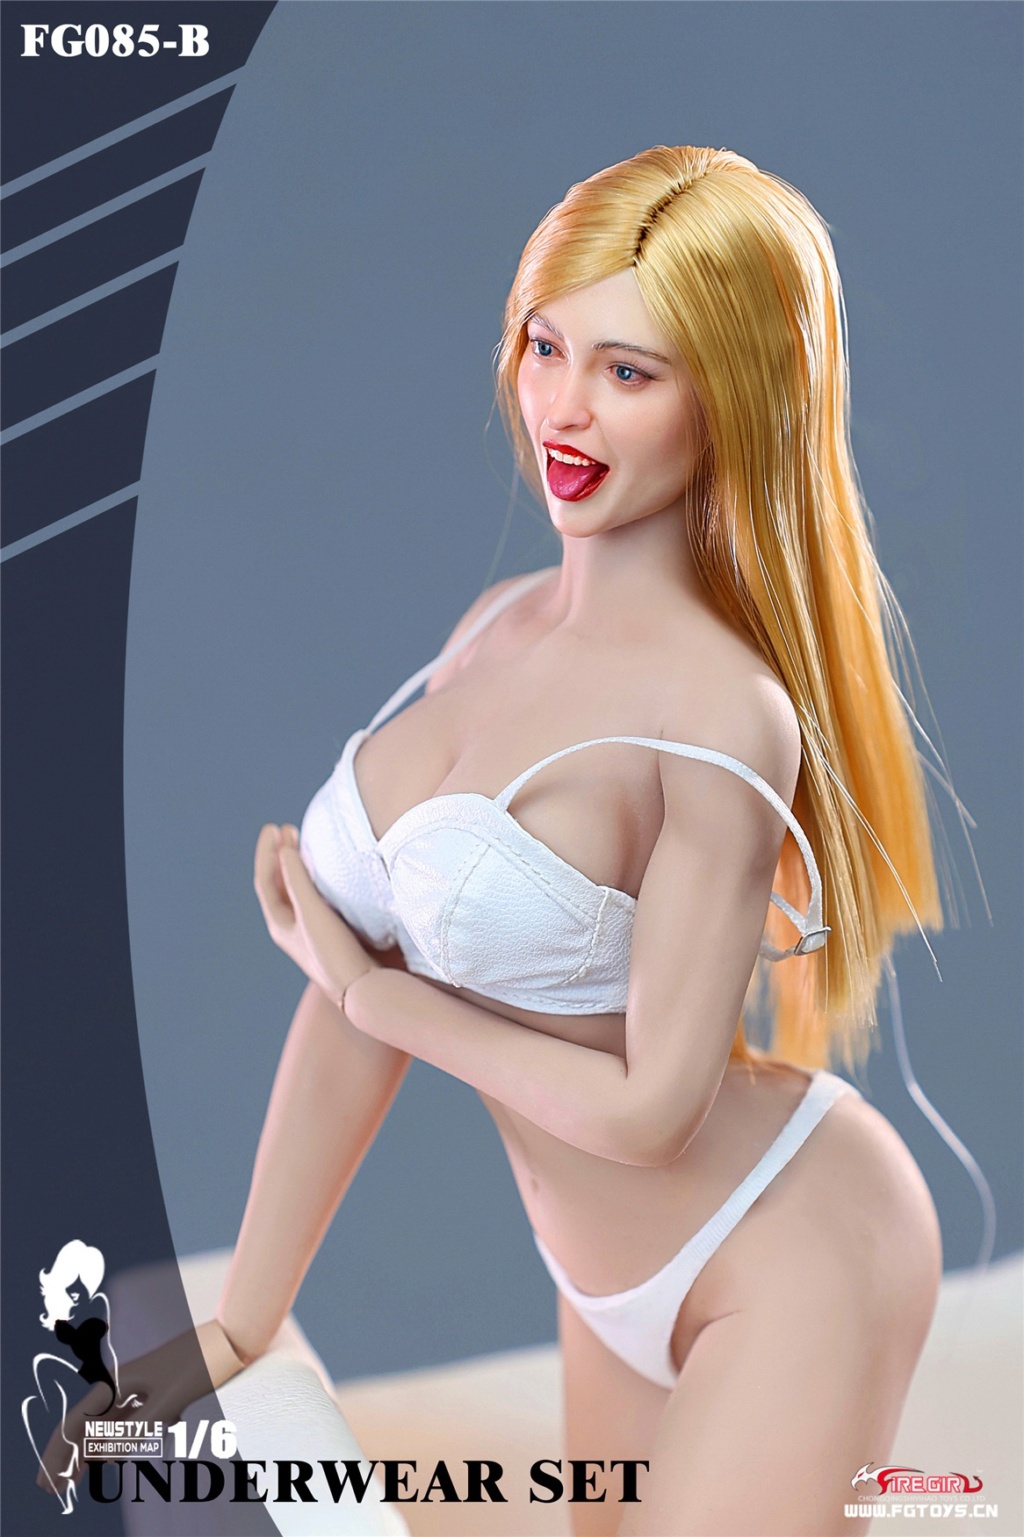 NEW PRODUCT: Fire Girl Toys: 1/6 FG085 Wardrobe Collection Female Underwear Set (Three Colors) NSFW 0cc1c510